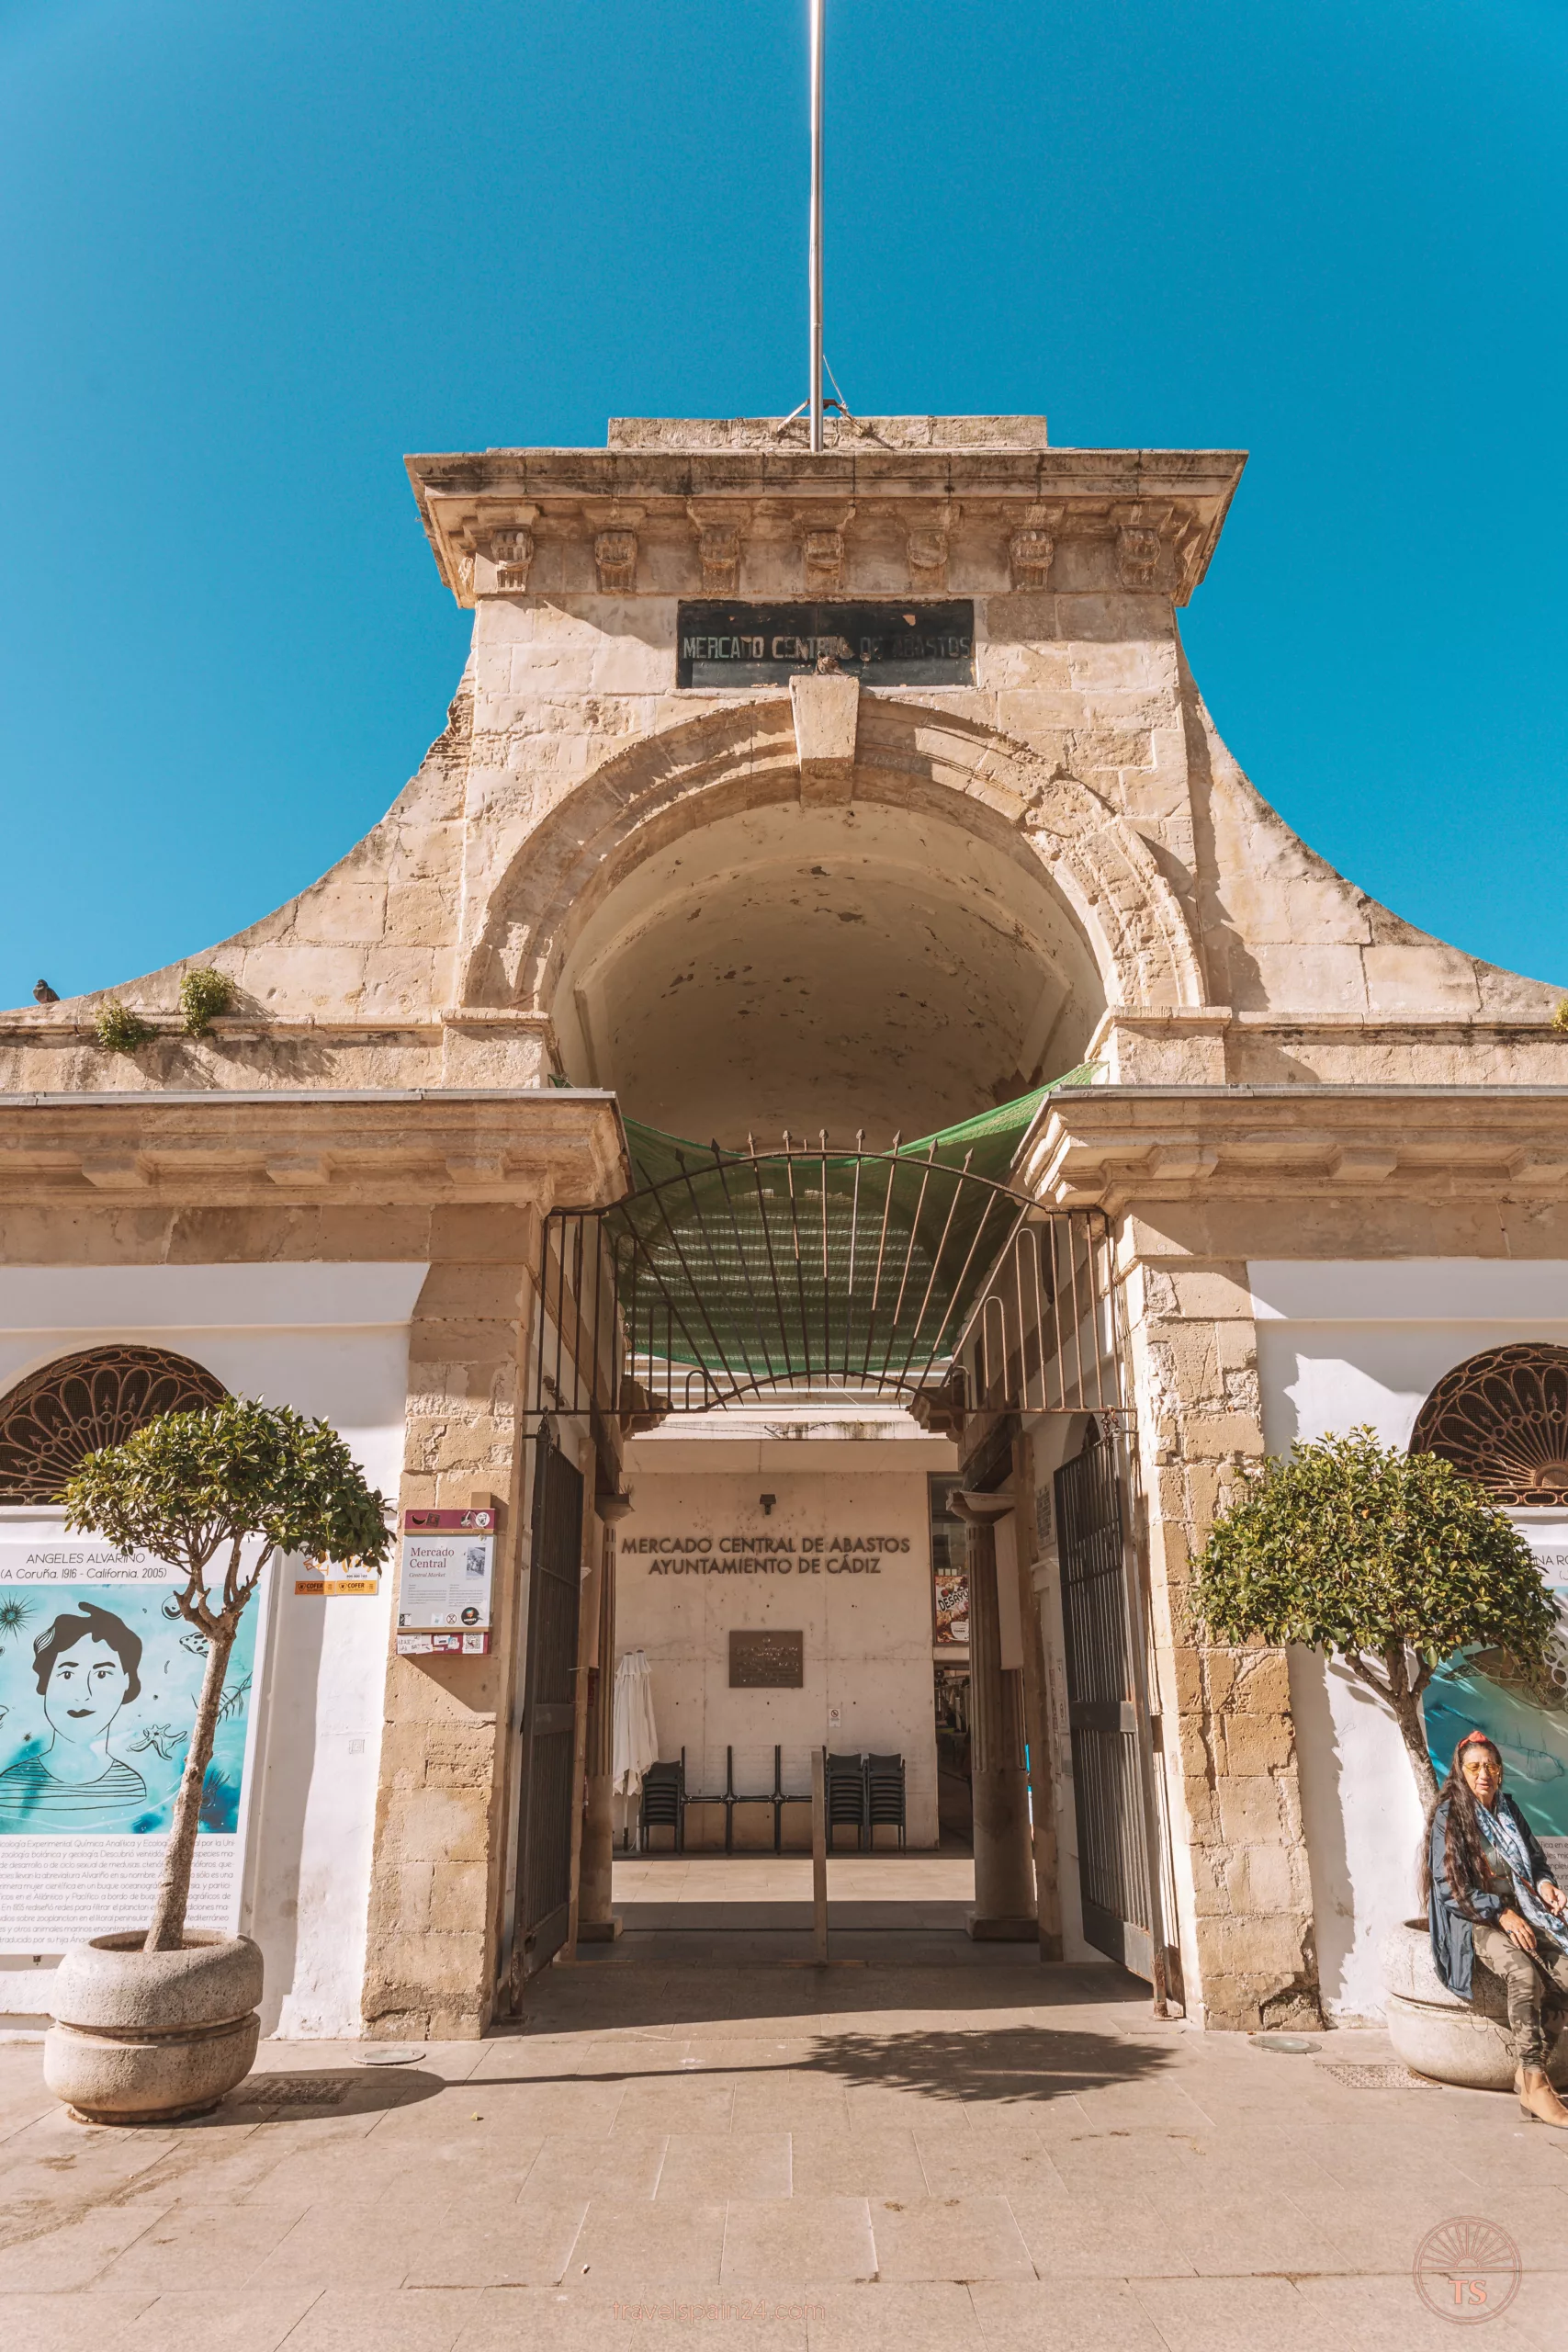 Entrance of Mercado Central de Abastos de Cádiz, showcasing its architectural design. This market is one of the Cadiz highlights, offering a lively glimpse into the local culture and daily life.
